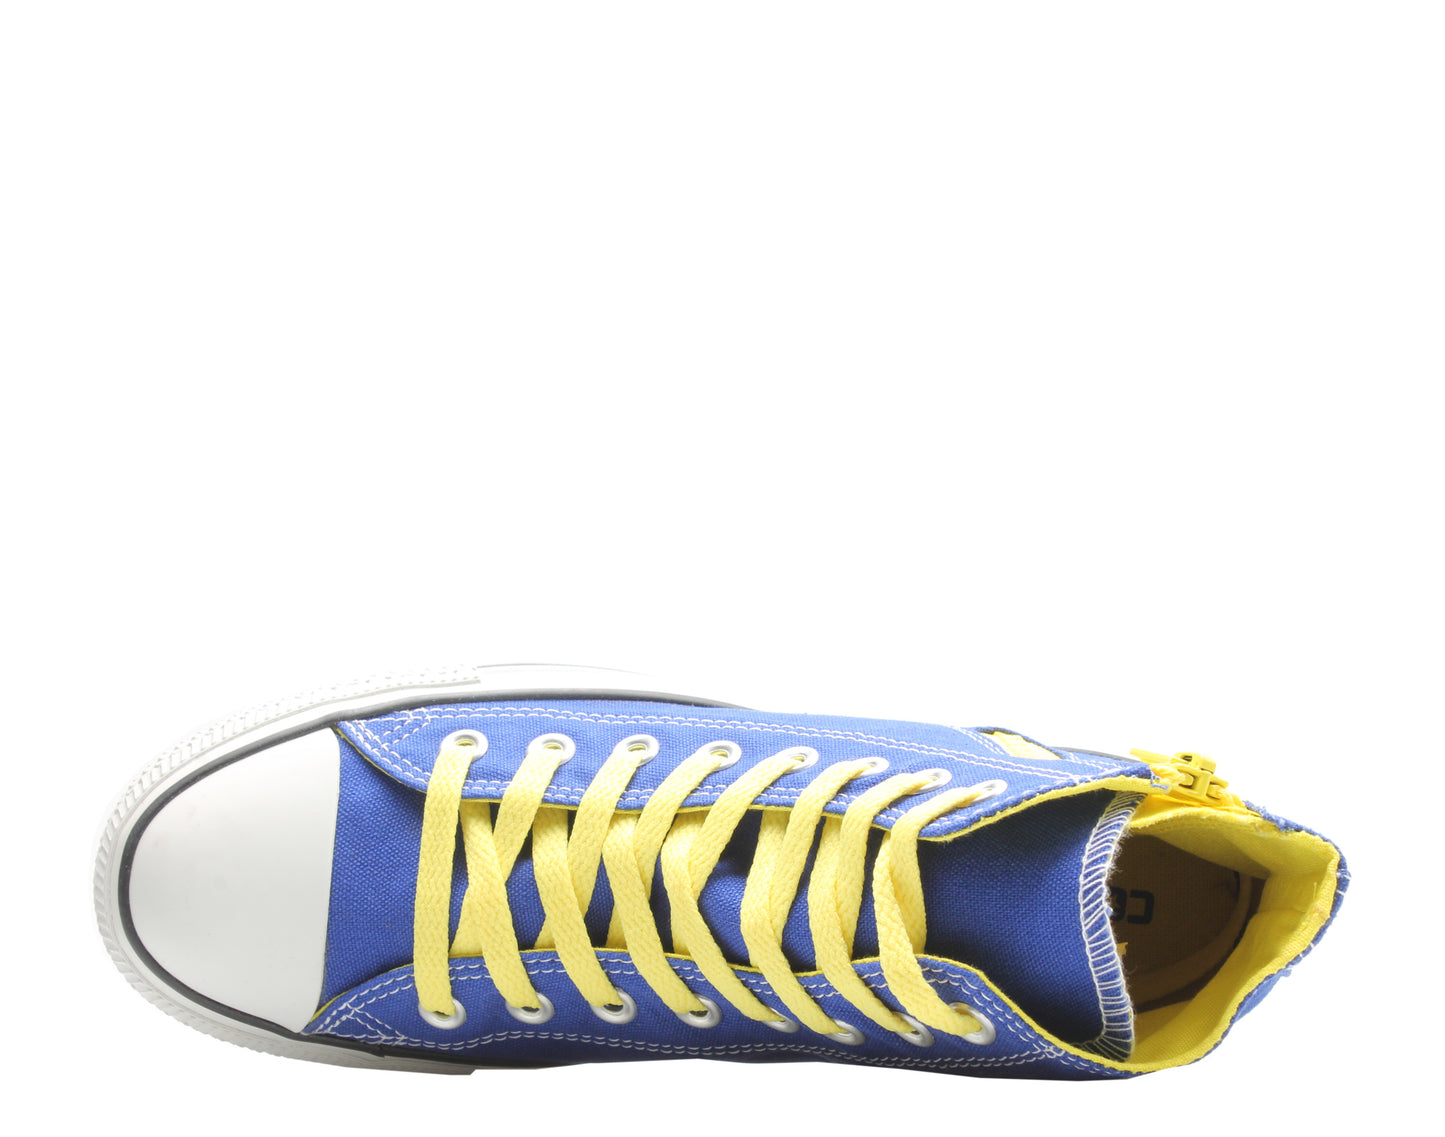 Converse Chuck Taylor All Star Side Zip Radio Blue/Yellow High Top Sneakers 142295C